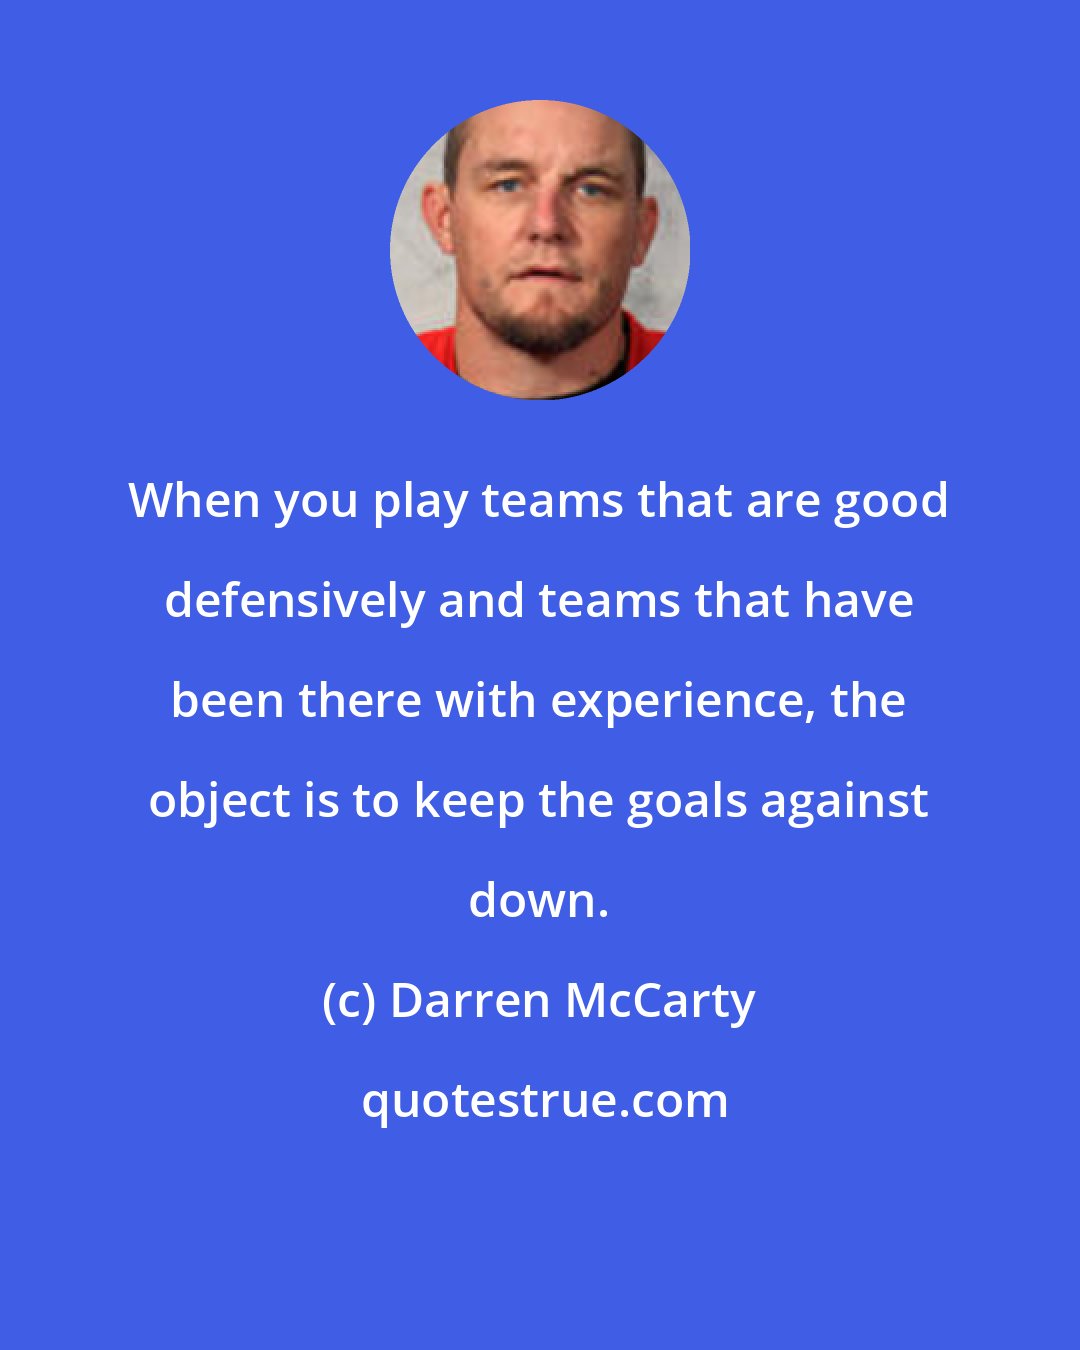 Darren McCarty: When you play teams that are good defensively and teams that have been there with experience, the object is to keep the goals against down.